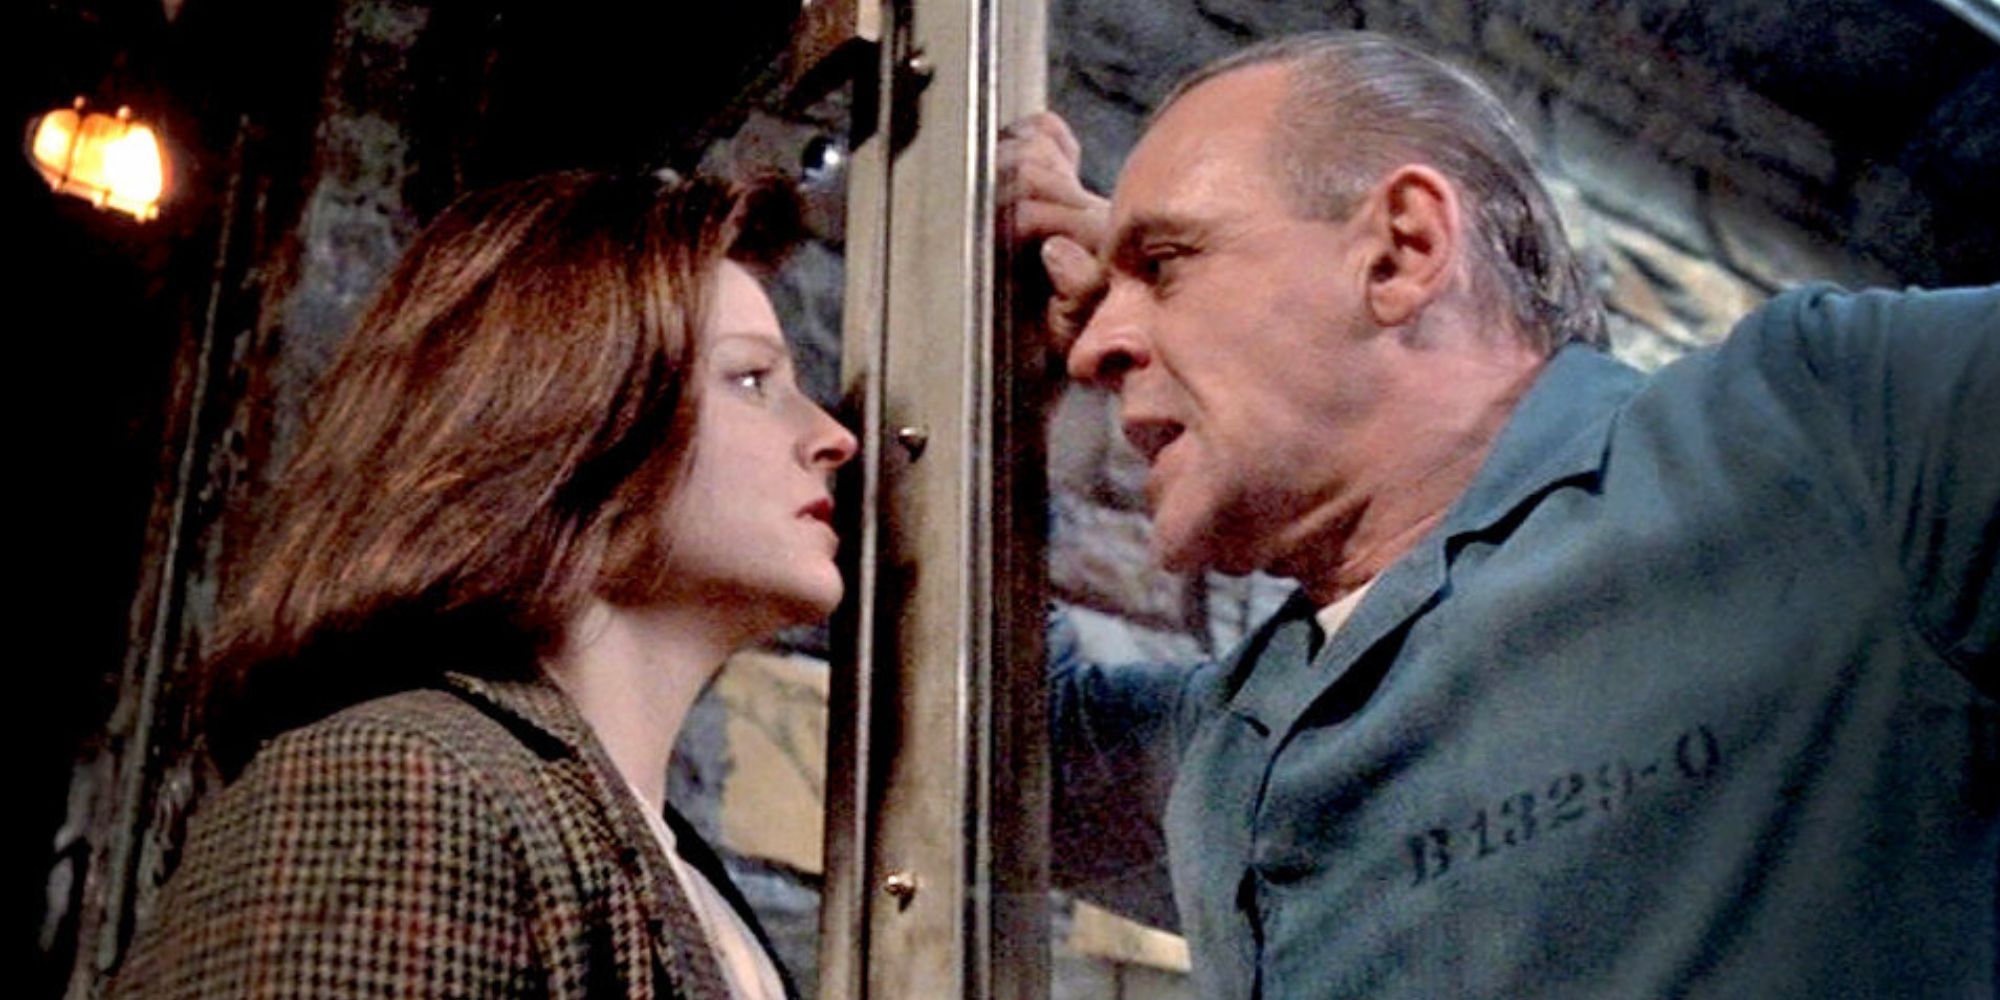 Jodie Foster looking at Anthony Hopkins behind the glass of his cell in The Silence of the Lambs